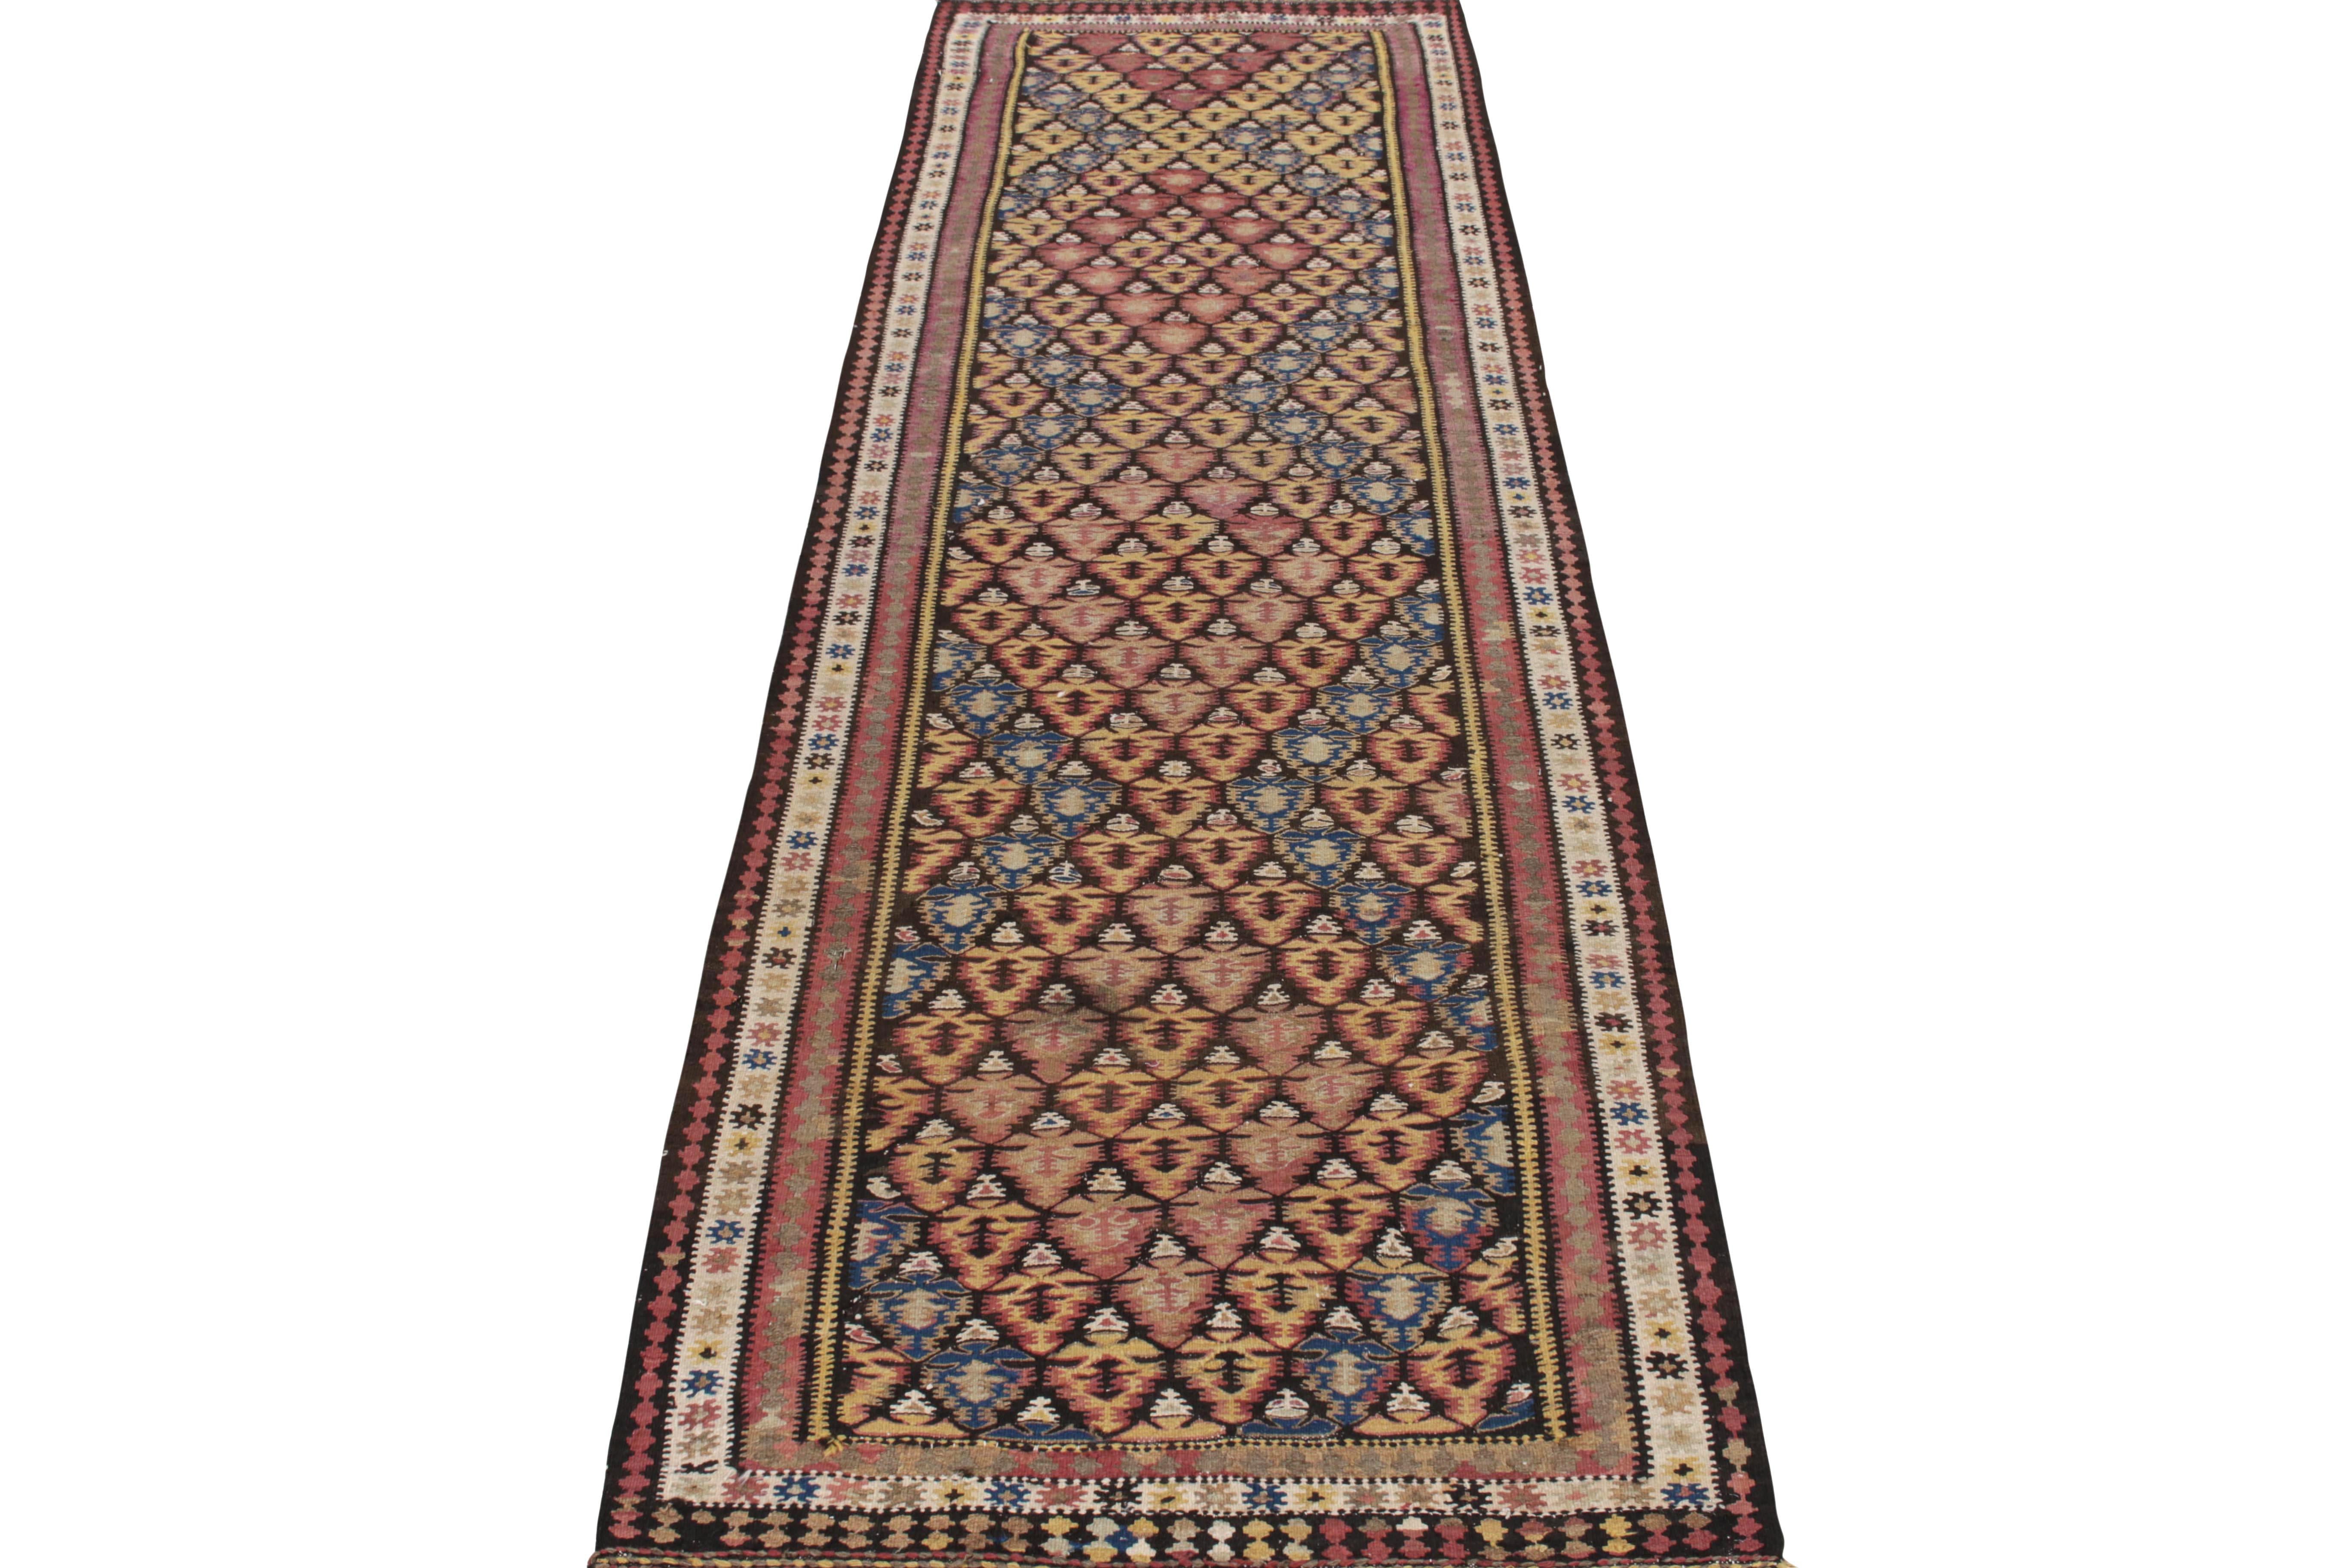 Handwoven circa 1950-1960, this 4x12 vintage Persian kilim runner showcases an ambitious vision in design where geometry is applied skillfully for a series of well defined diamond medallions in the centre, deliciously distinguished by patterns